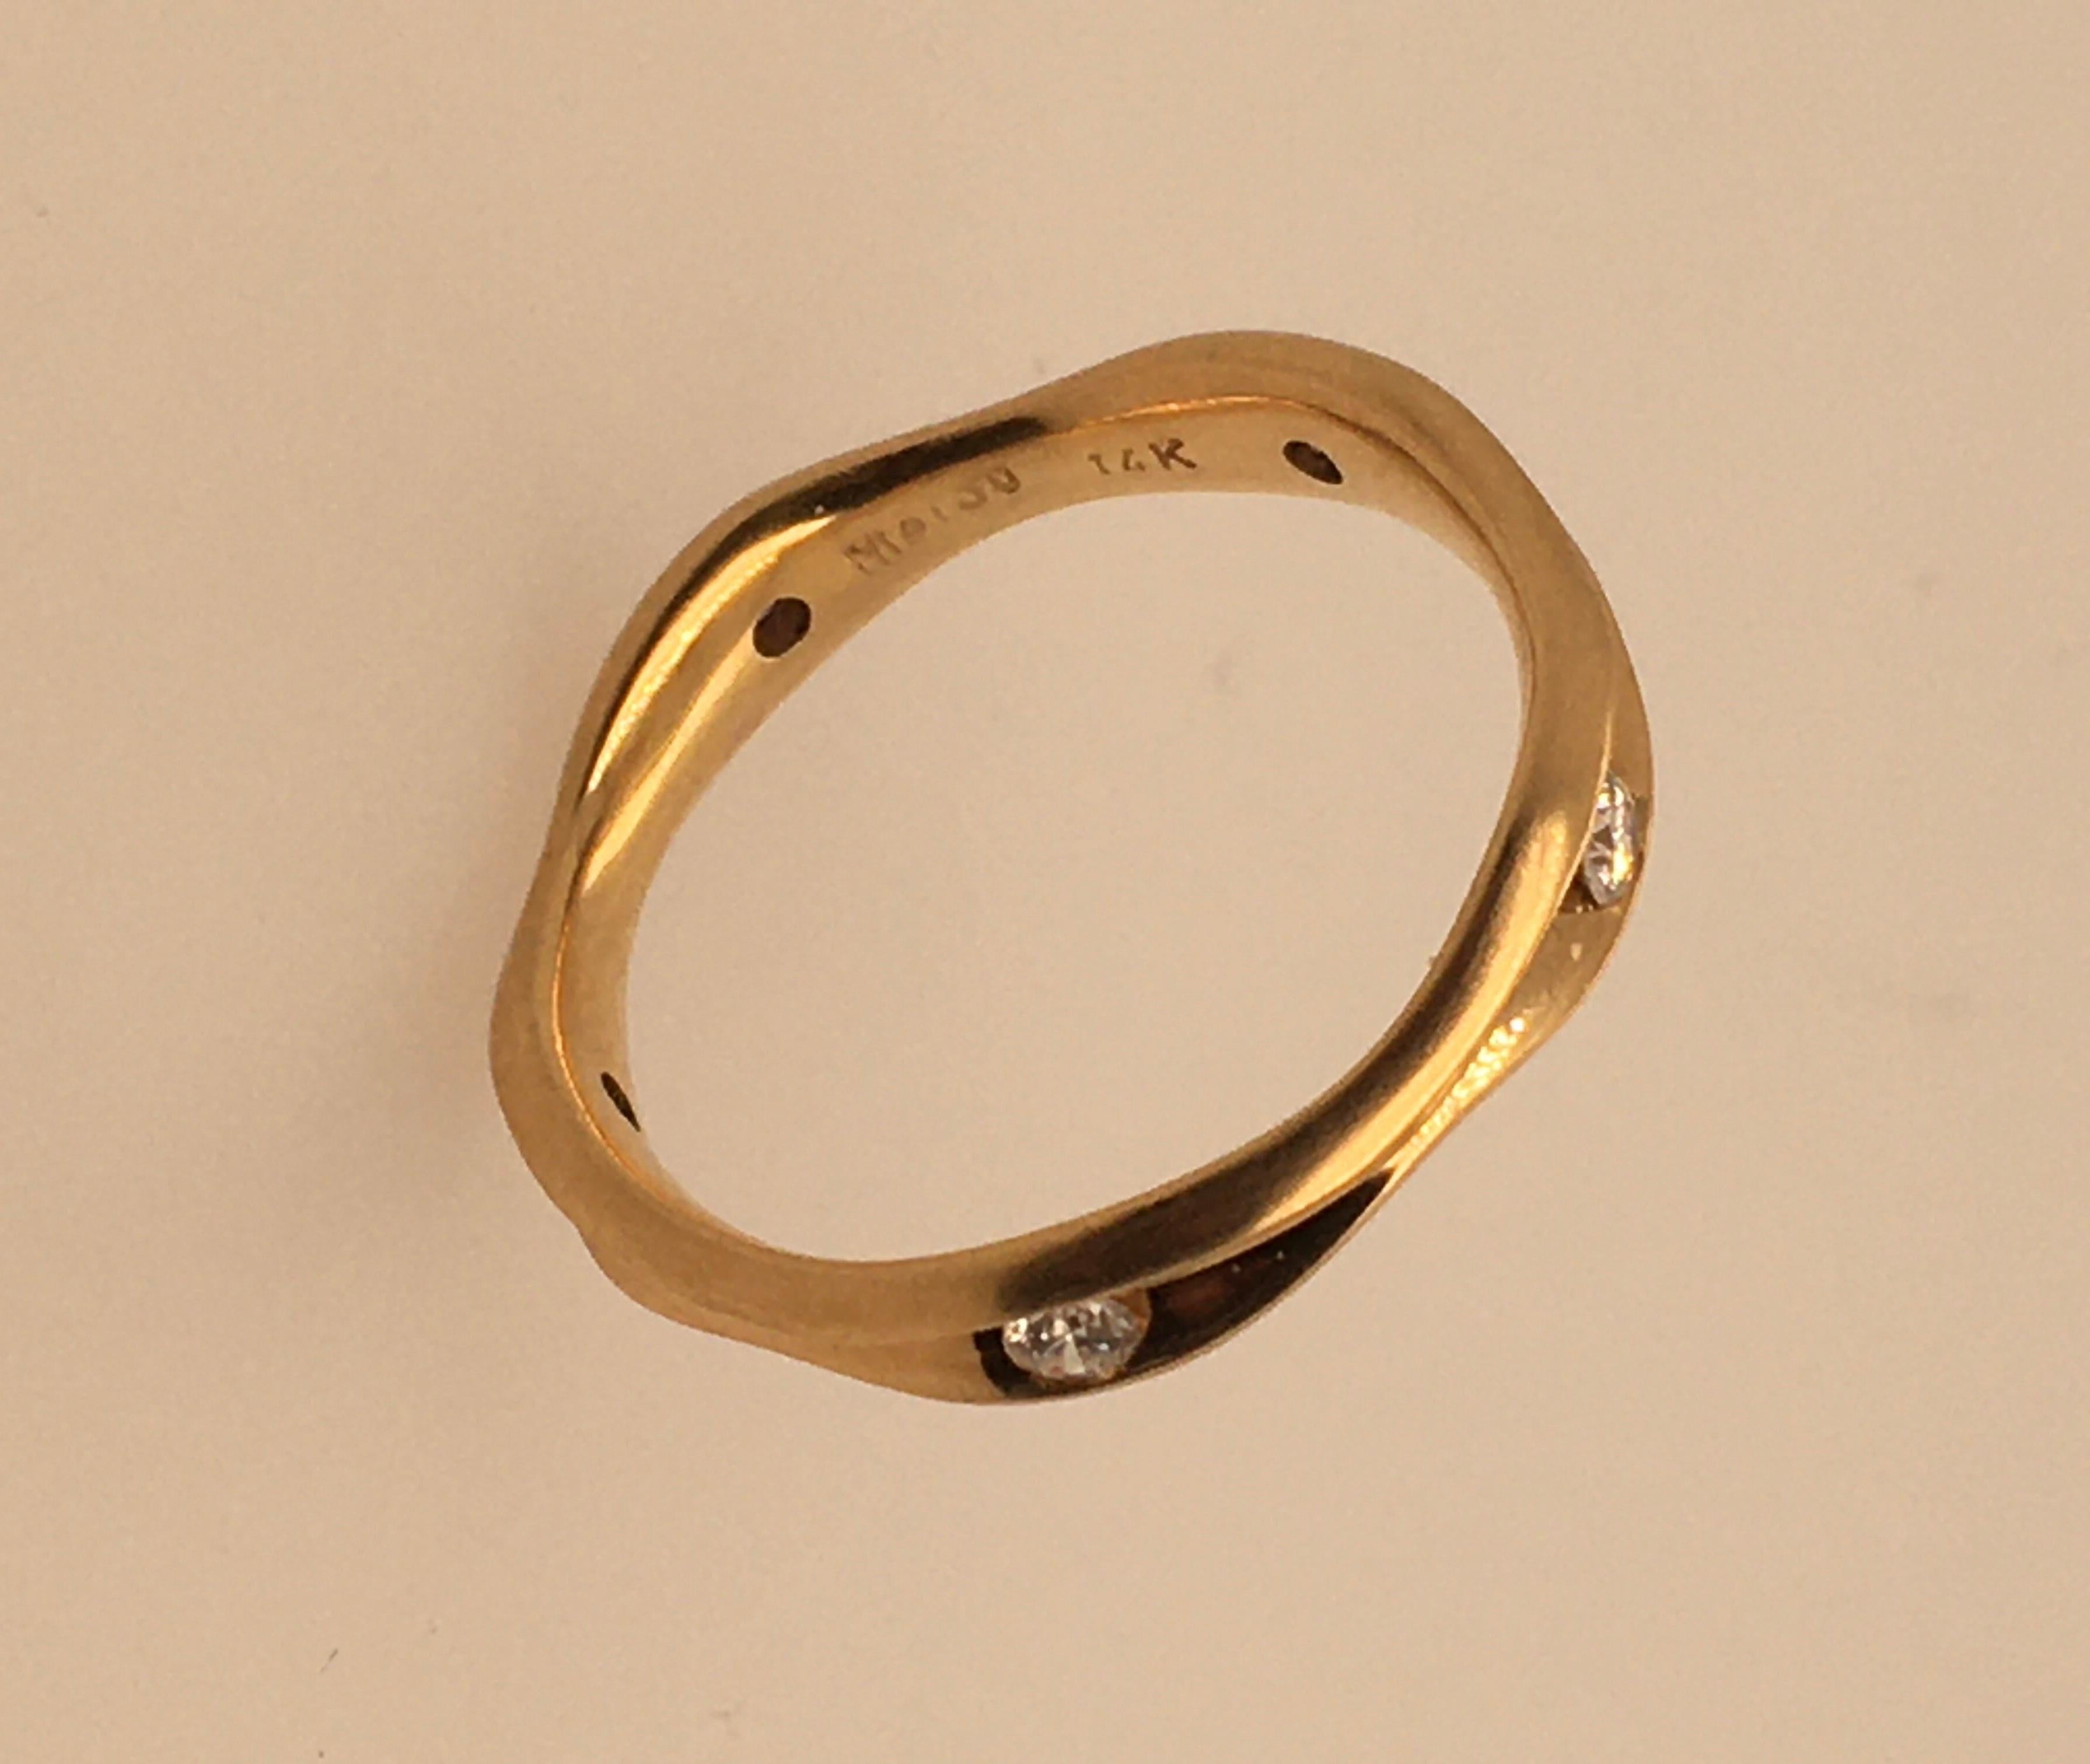 A beautiful 14K satin finish yellow gold wavy ring with 5 diamonds in a channel setting, equi-distance around the band.   Each stone is 045 pts.  / TCW 22.5 pts.  Designer's imprint on interior reads 